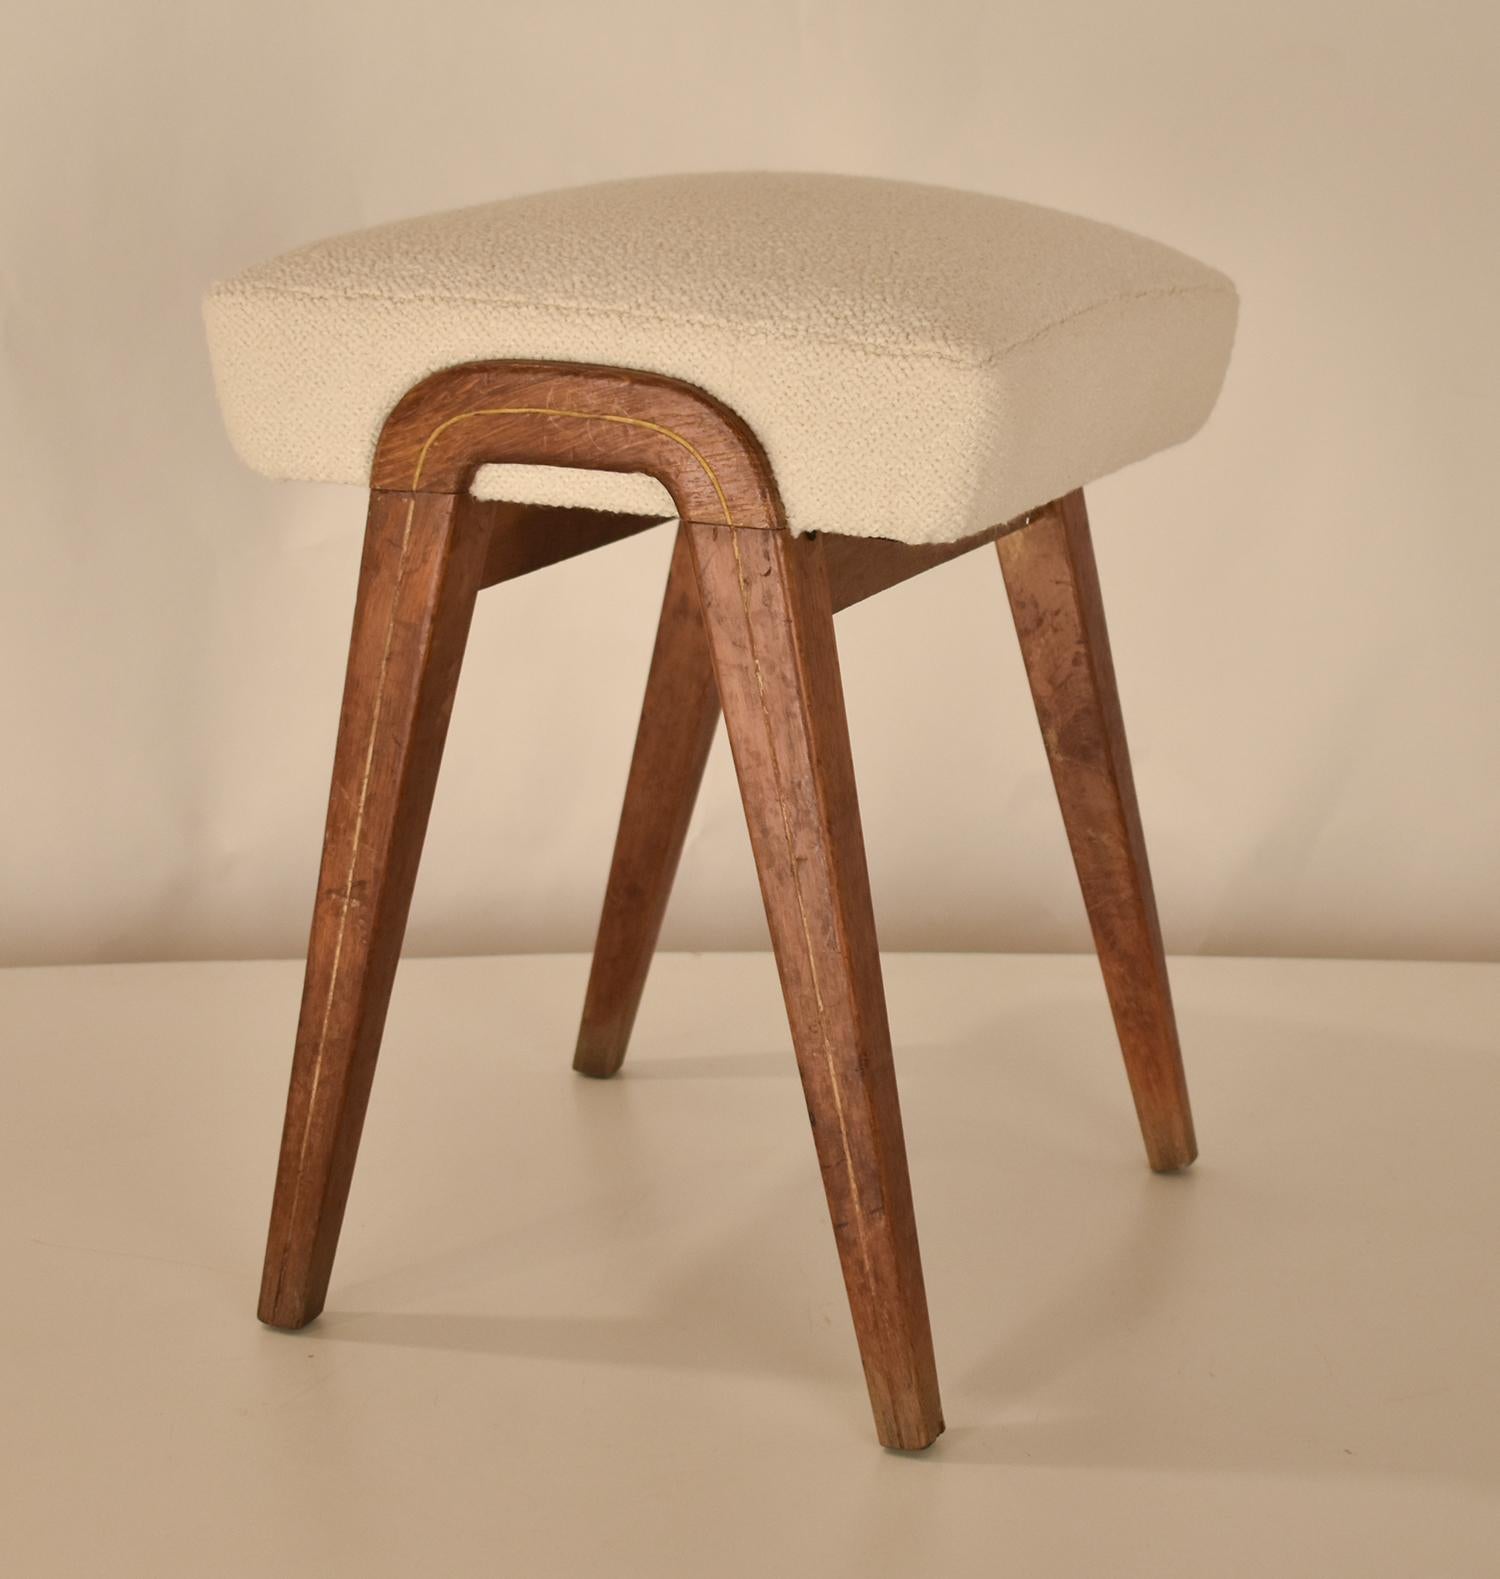 Mid-20th Century Spanish midcentury stool in oak wood and white textile.1960's